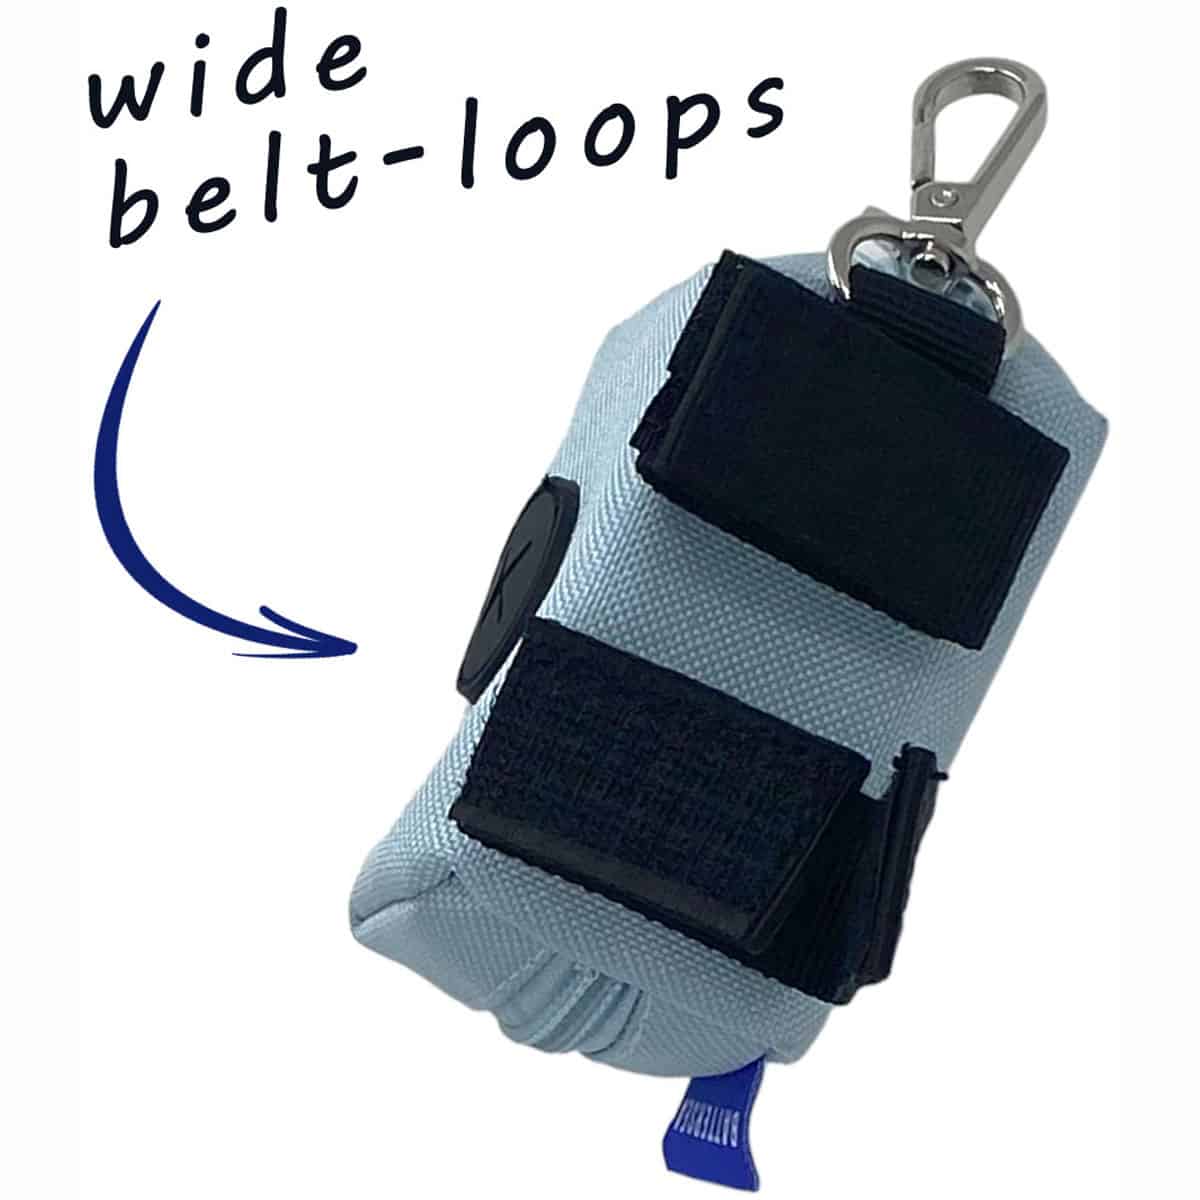 The Battersea Poop Bag Holder: Lightweight & portable, elevate your strolls with the convenience of the Battersea Poop Bag Holder - belt loops